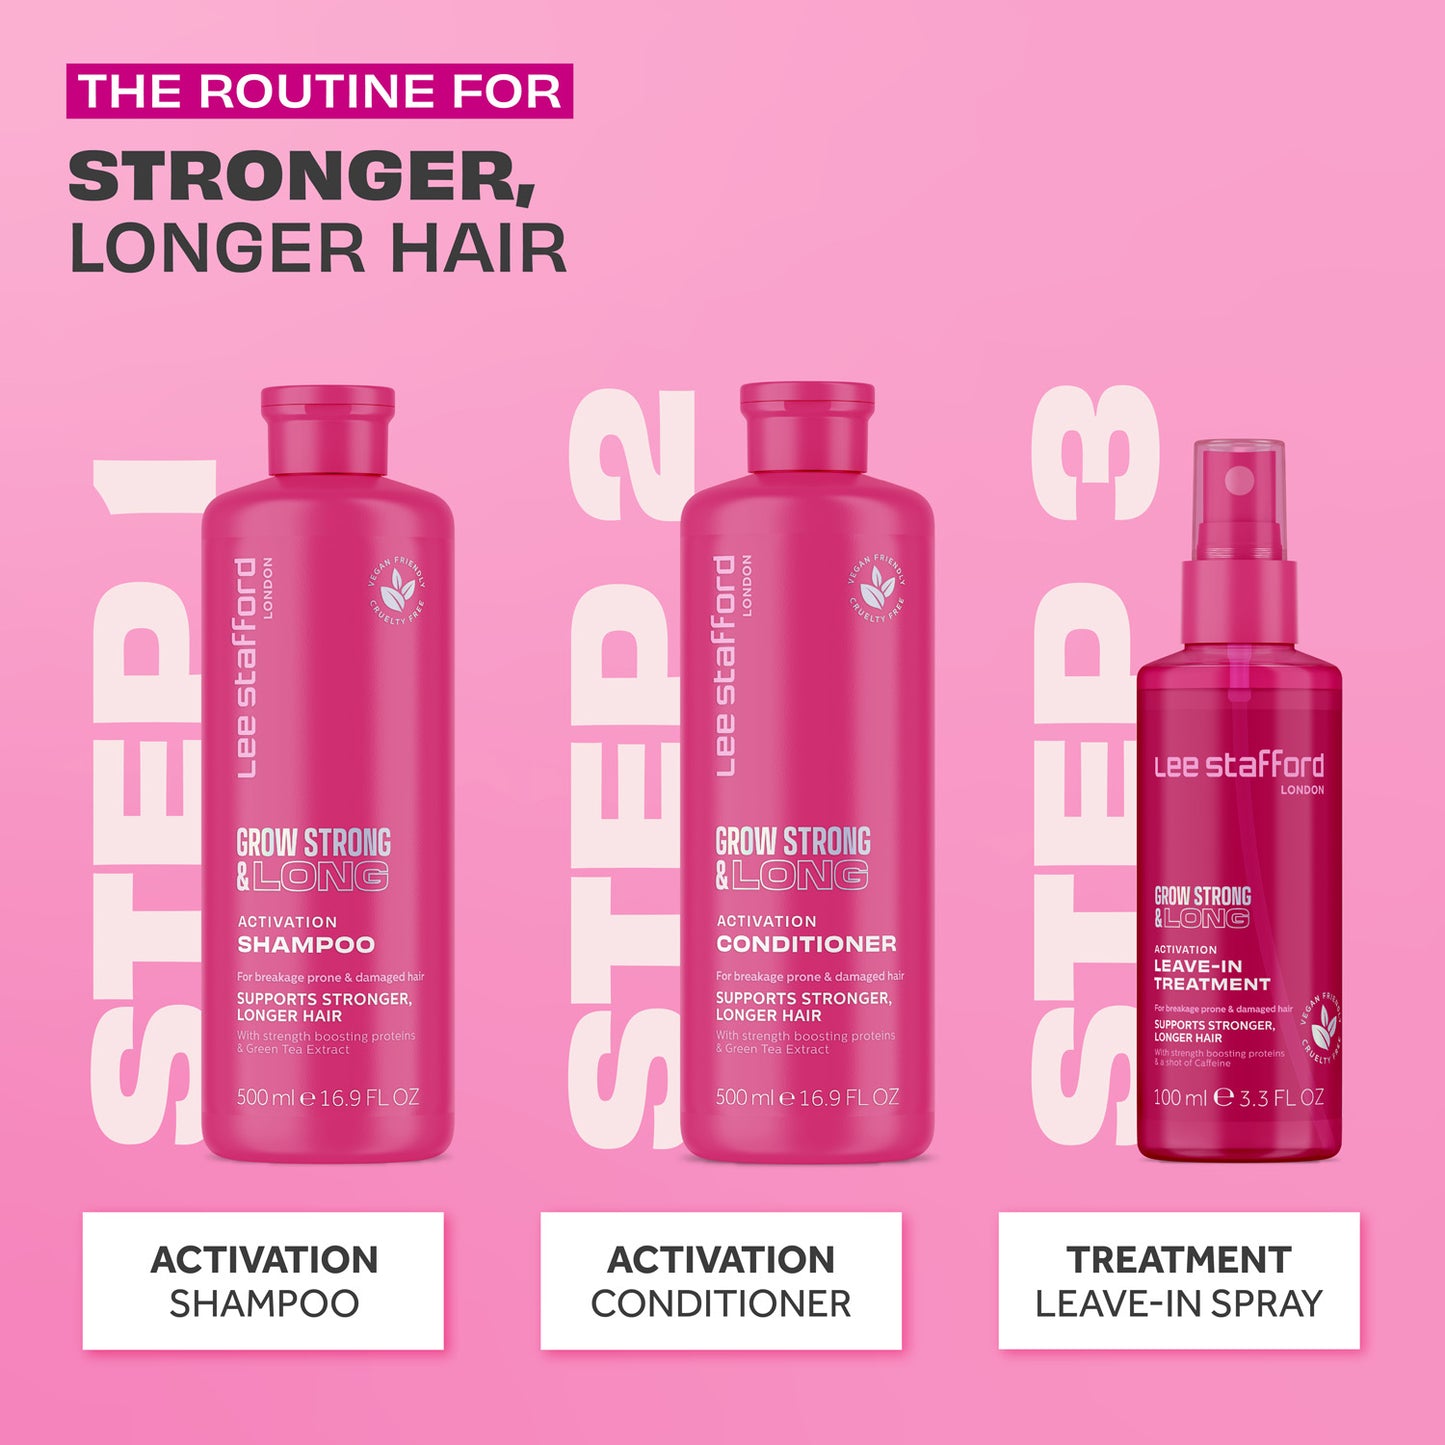 Grow Strong & Long Activation Conditioner